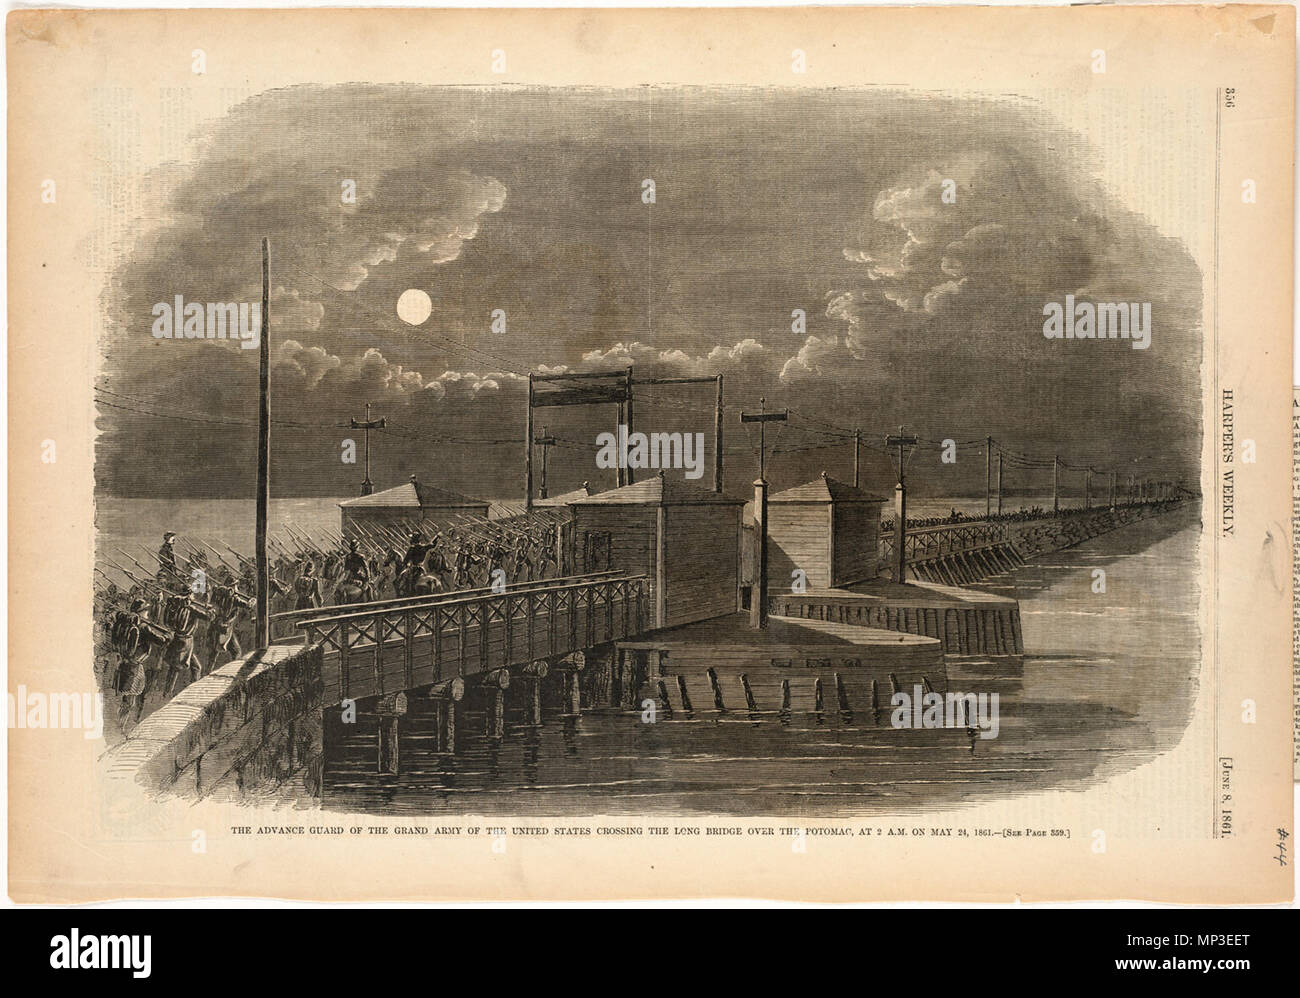 . English:   File name: 10 09 000044 Title: The advance guard of the Grand Army of the United States crossing the Long Bridge over the Potomac, at 2 A.M. on May 24, 1861 Creator/Contributor: Homer, Winslow, 1836-1910 (artist) Date issued: 1861-06-08 Physical description: 1 print : wood engraving Genre: Wood engravings; Periodical illustrations Notes: Published in: Harper's Weekly, Volume V, 8 June 1861, p. 356. Collection: Winslow Homer Collection Location: Boston Public Library, Print Department Rights: No known restrictions Flickr data on 2011-08-11: Camera: Sinar AG Sinarback 54 FW, Sinar m Stock Photo